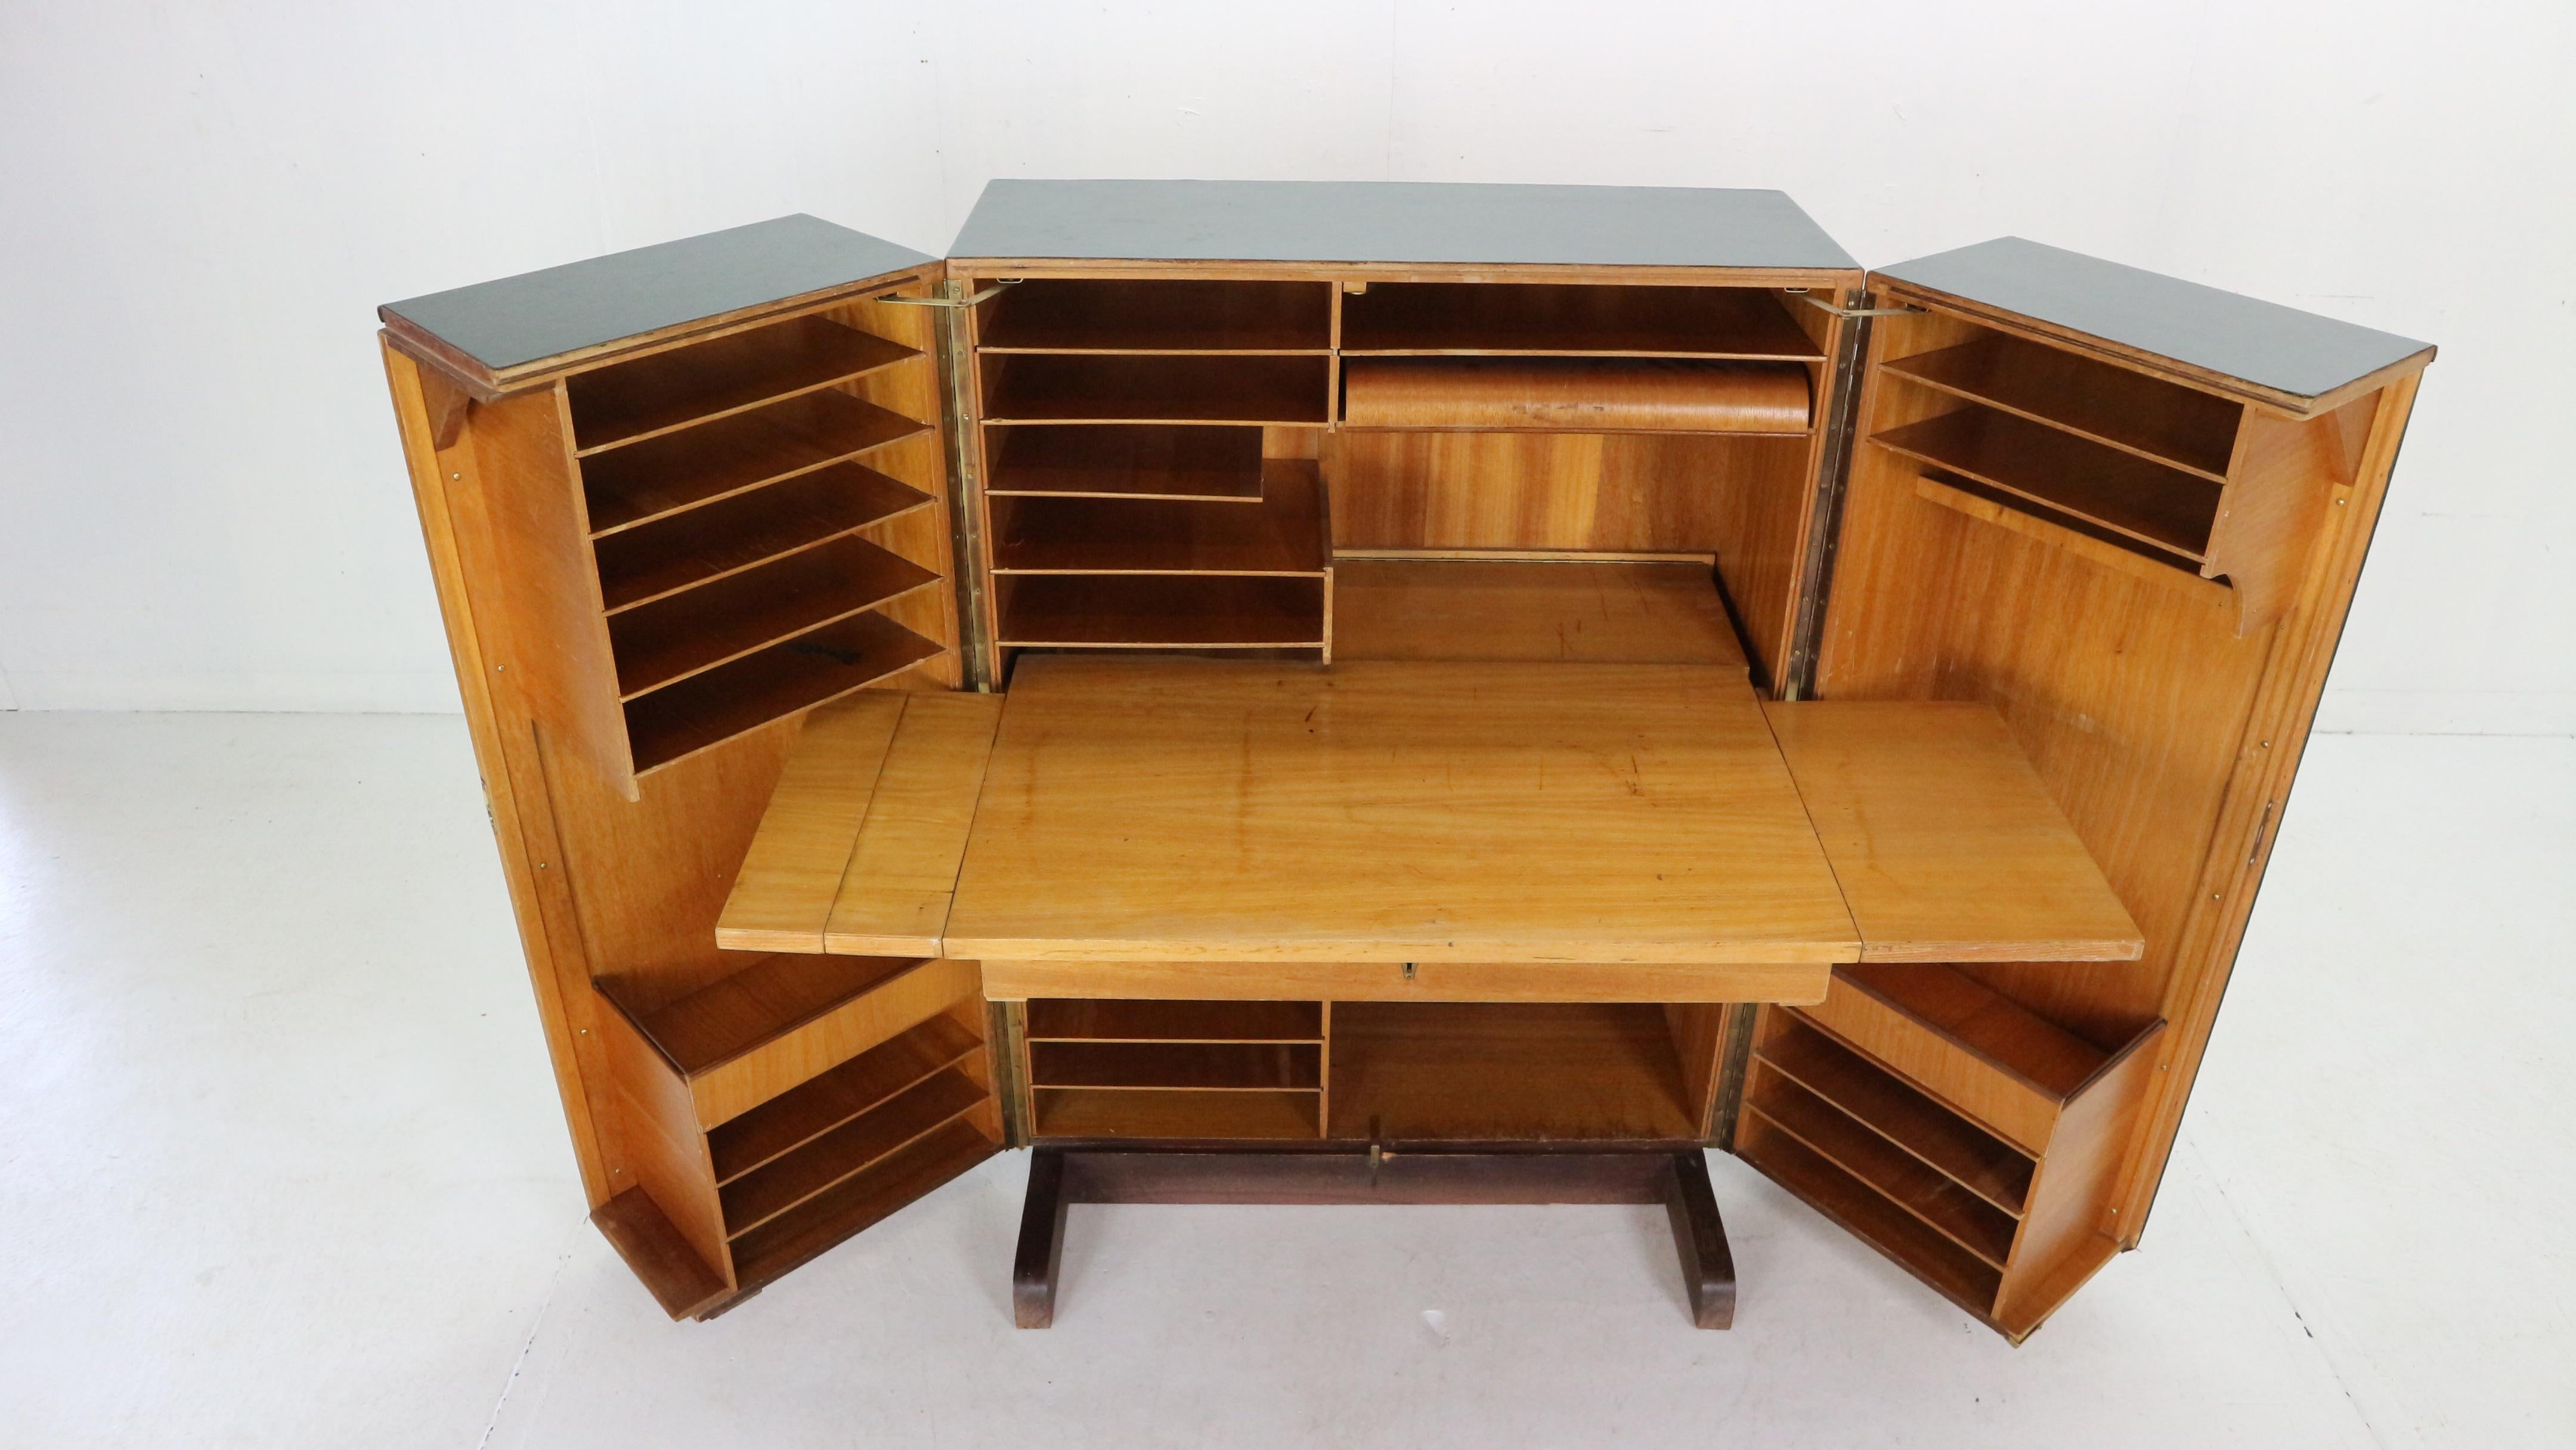 Special edition multifunctional fold out secretary desk, cabinet designed by Swiss architects Ernst Mummenthaler and Otto Meier in 1960's period, Switzerland. 
This cabinet can be transformed to a real working space with drawers, shelves etc. -